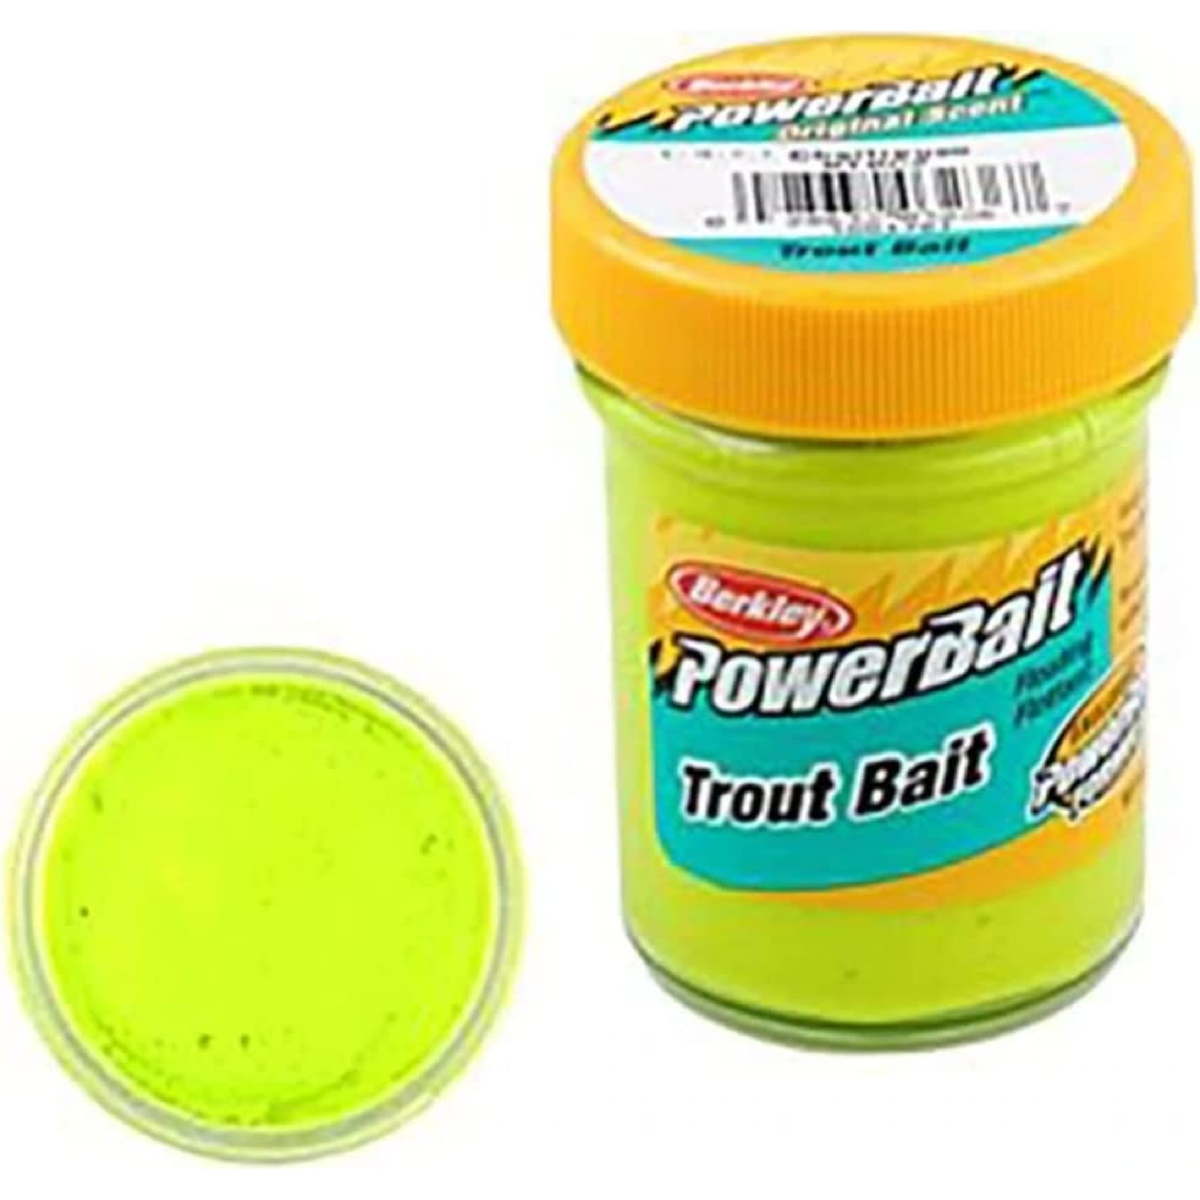 Photo of Berkley PowerBait Trout Bait for sale at United Tackle Shops.